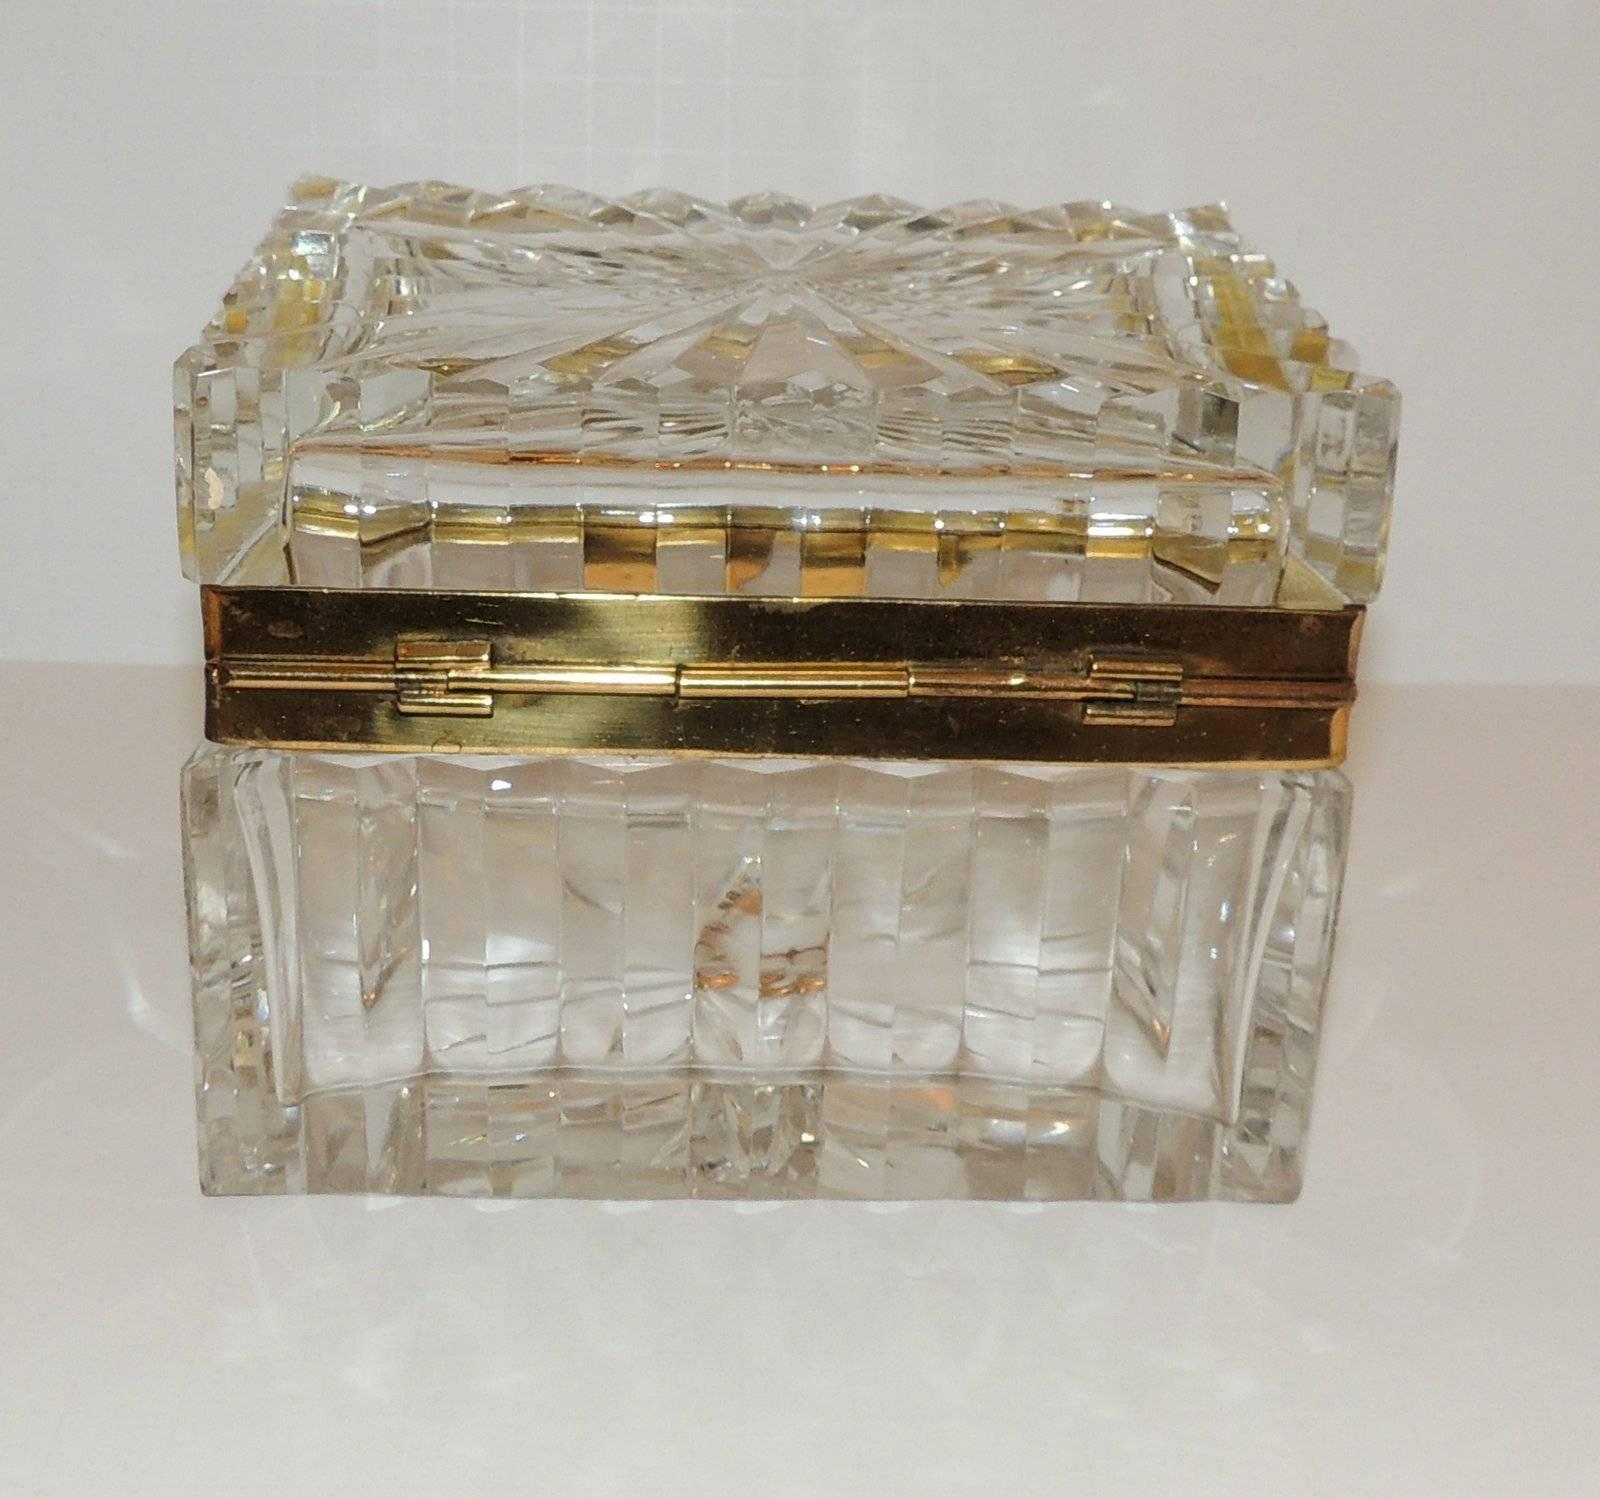 Bronze Stunning Pair French Etched Cut Crystal Ormolu-Mounted Deco Casket Jewelry Box